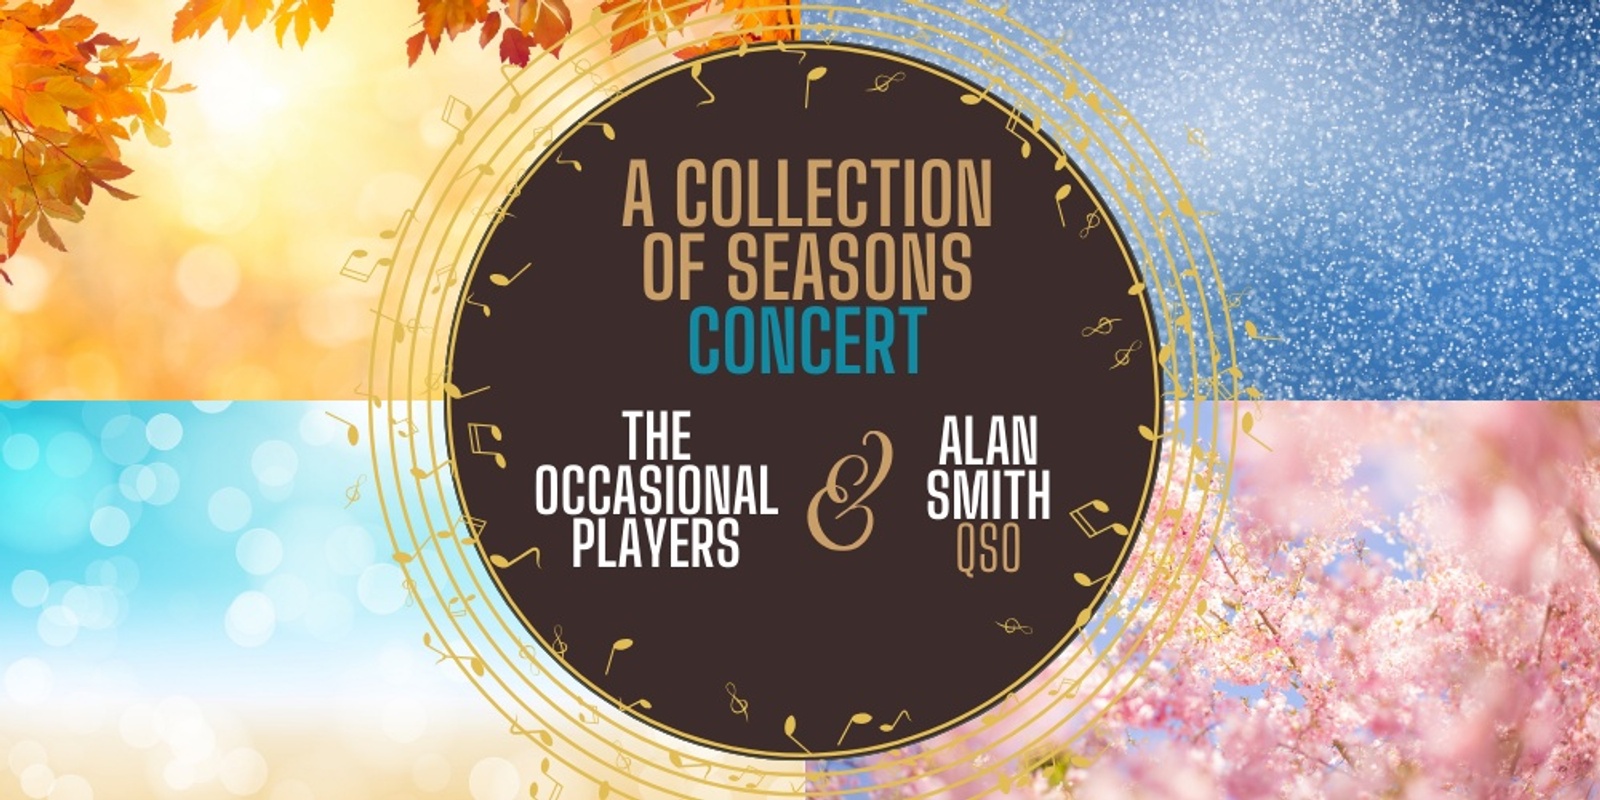 Banner image for A COLLECTION OF SEASONS CONCERT | THE OCCASIONAL PLAYERS & ALAN SMITH